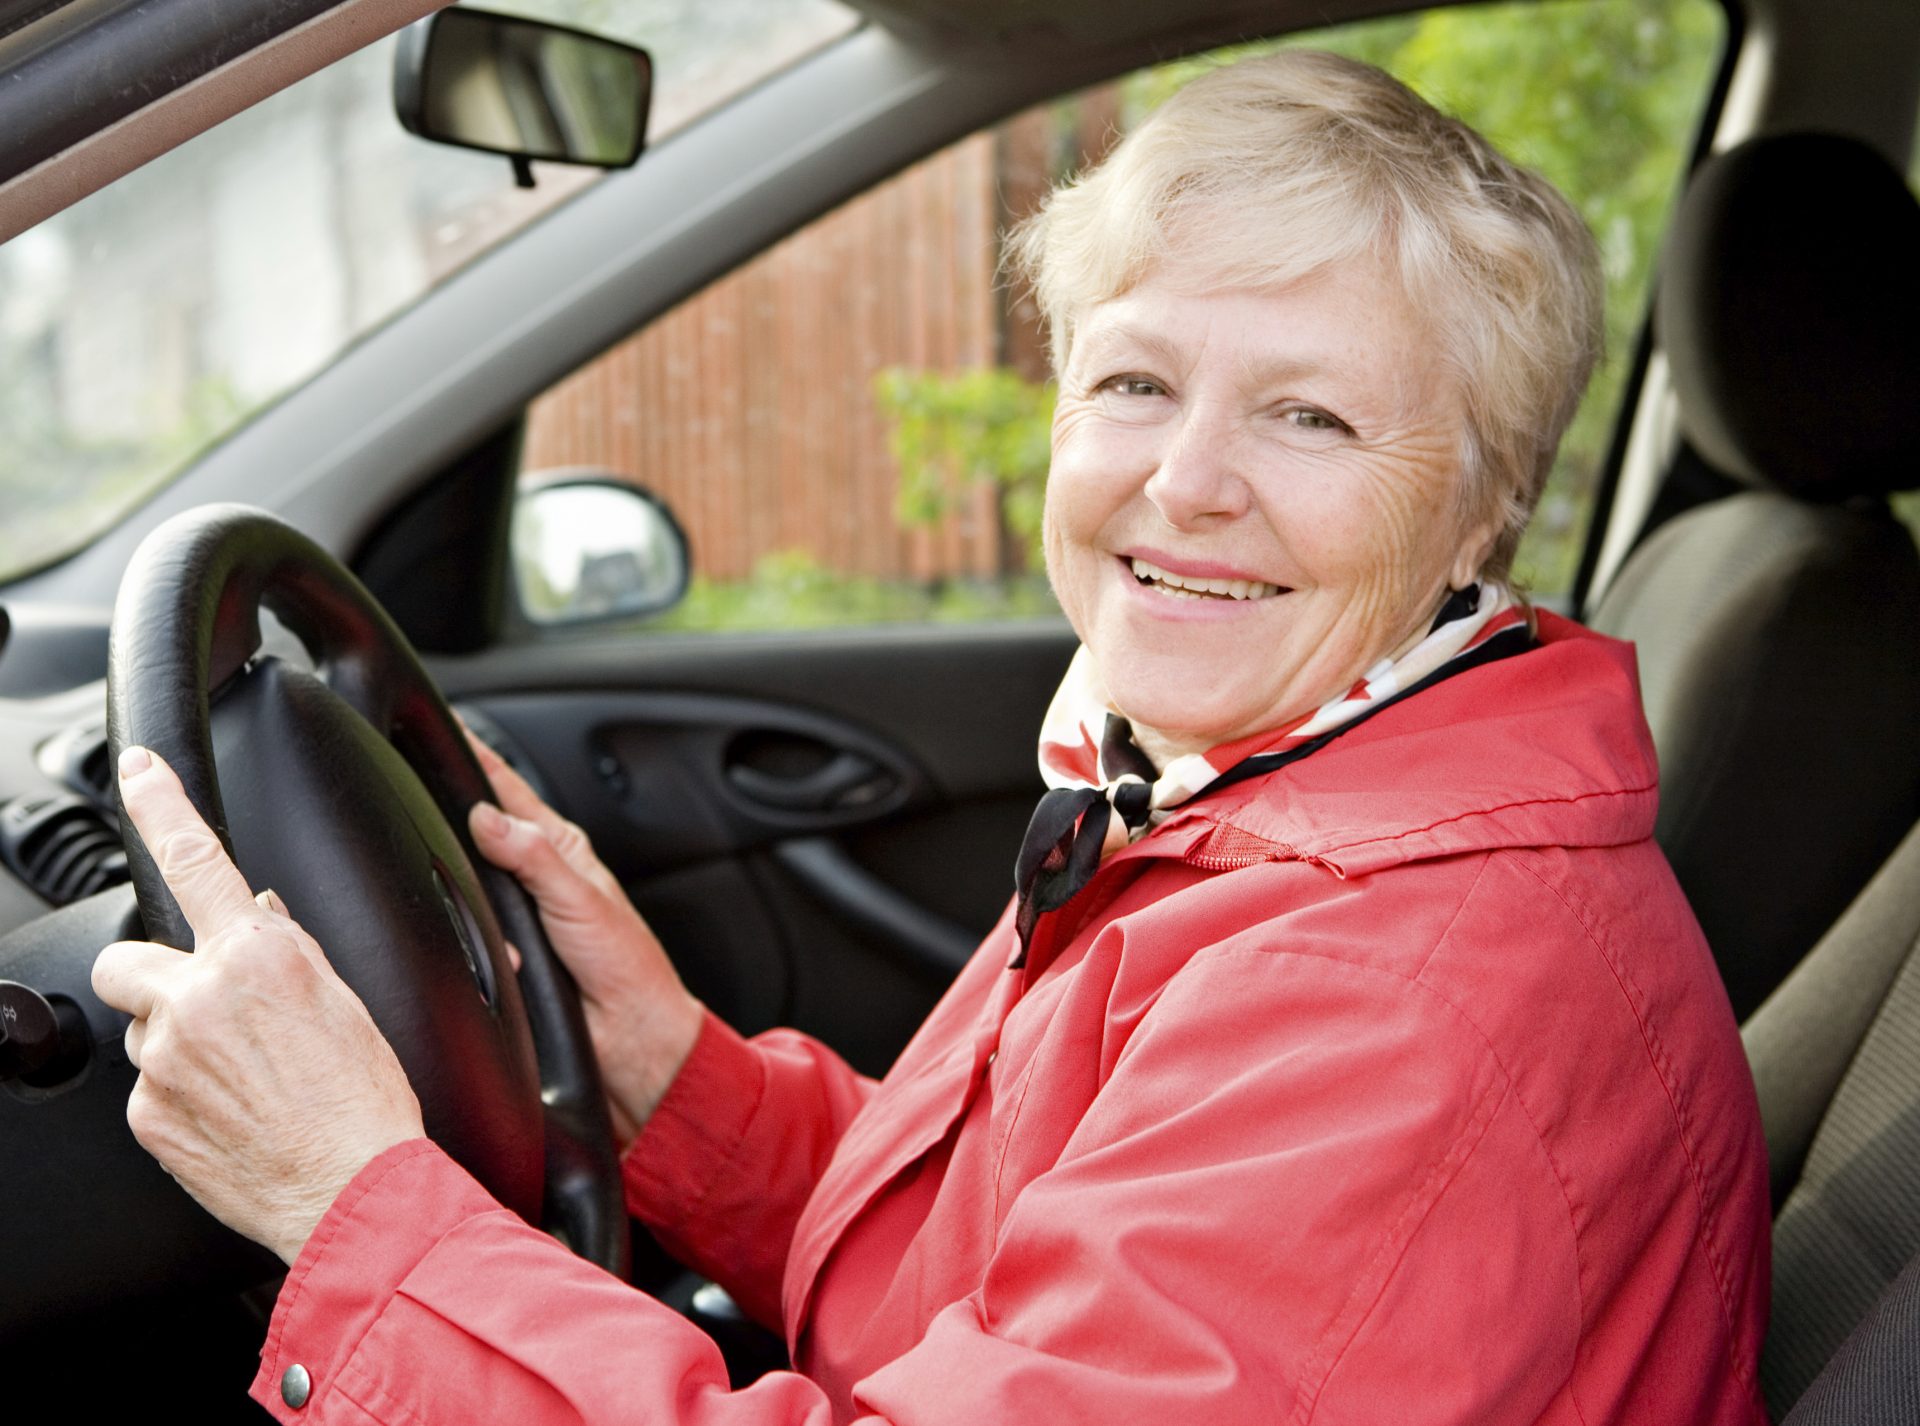 Smiling lady driving a car posing for the camera